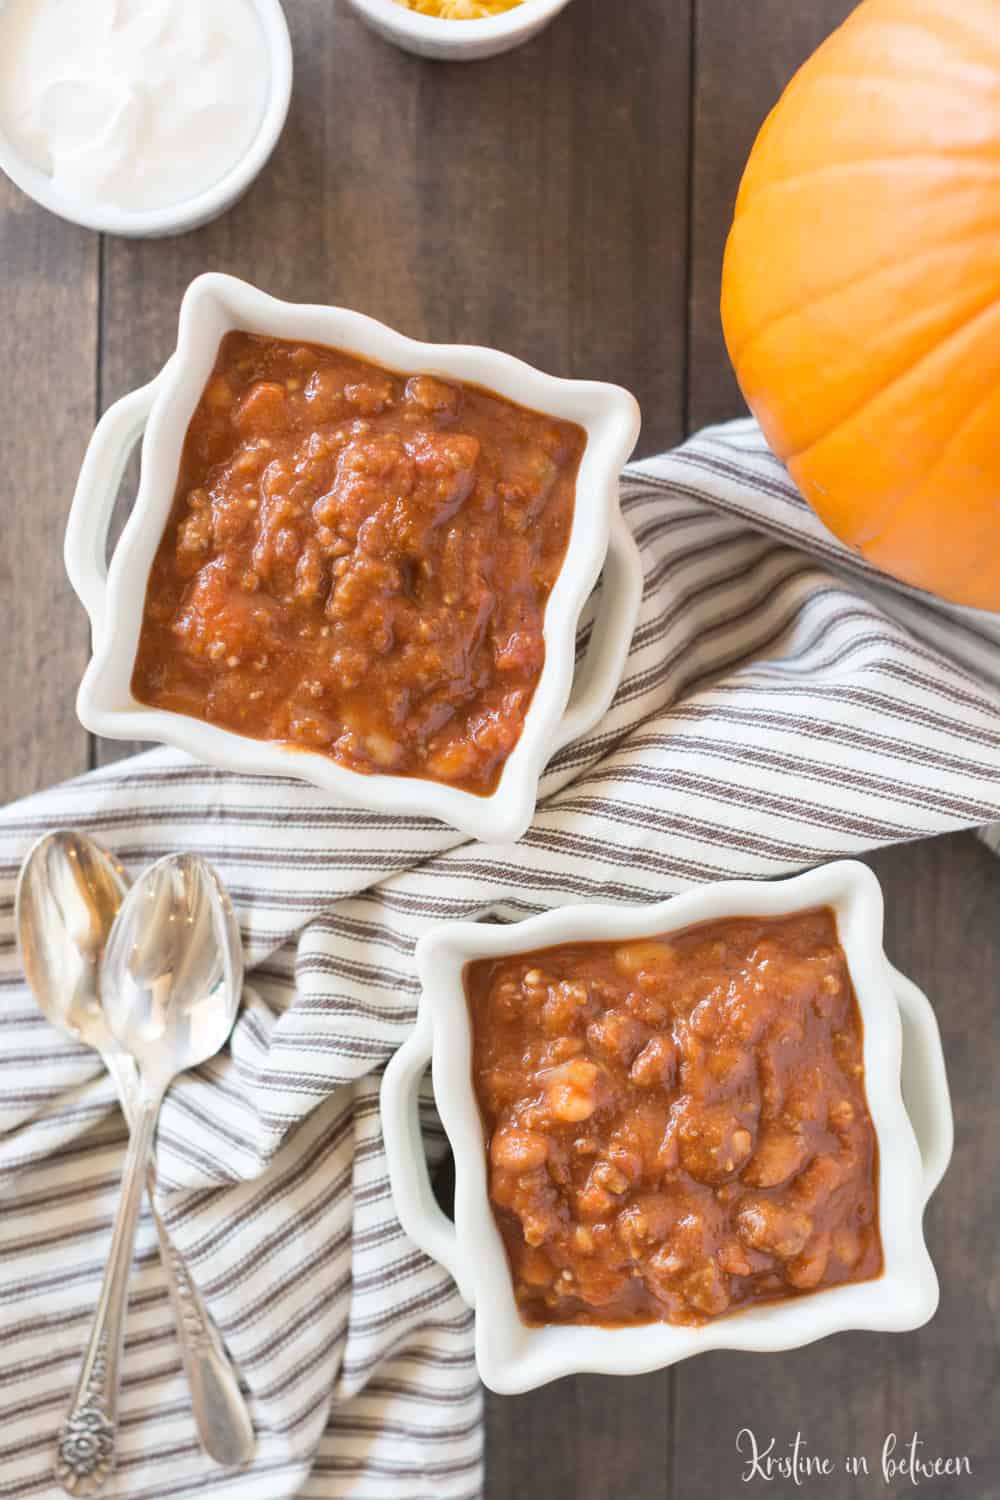 Two bowls of pumpkin chili with a small pumpkin and a brown striped napkin sitting next to them.